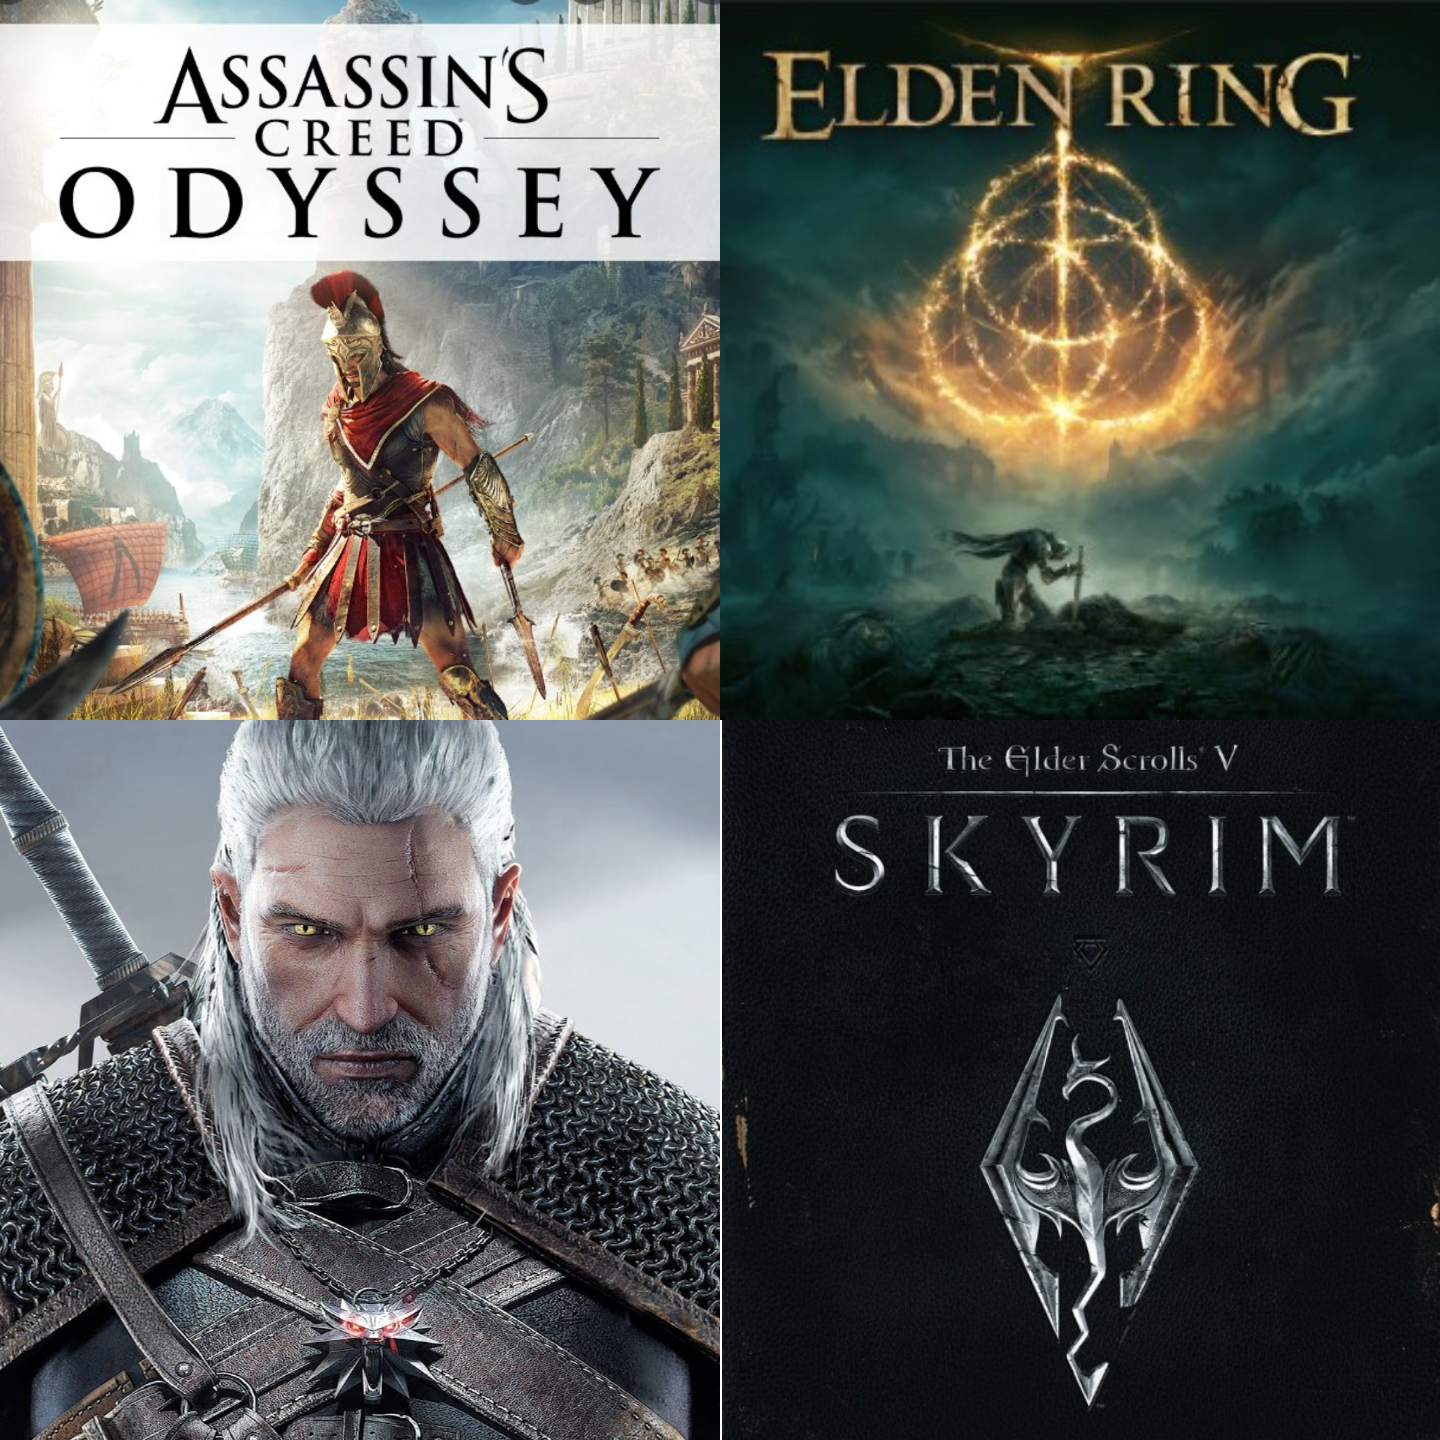 Art with the banners of Assassin's Creed Odyssey, Elden Ring, The Witcher 3, and Skyrim